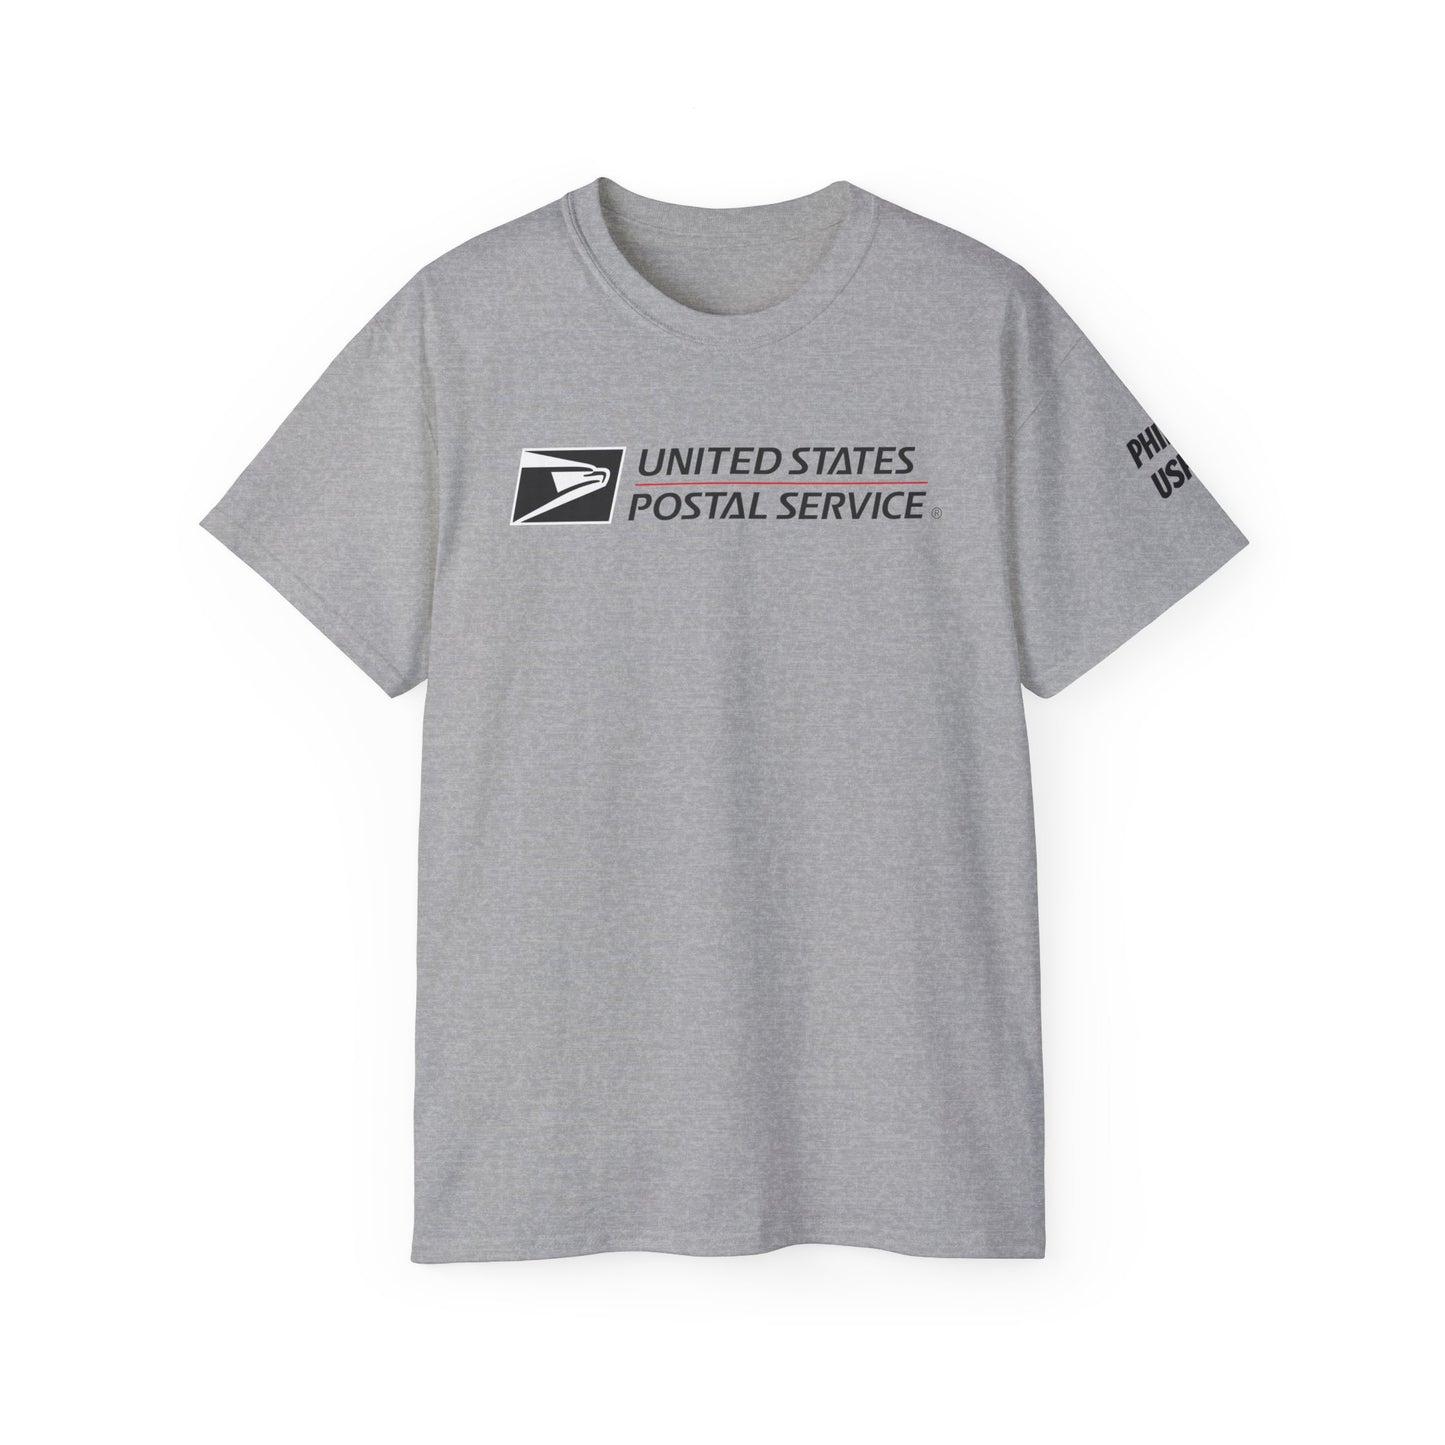 USPS Logo "Rep Your City" (Philly USPS)on sleeve Unisex T-shirt